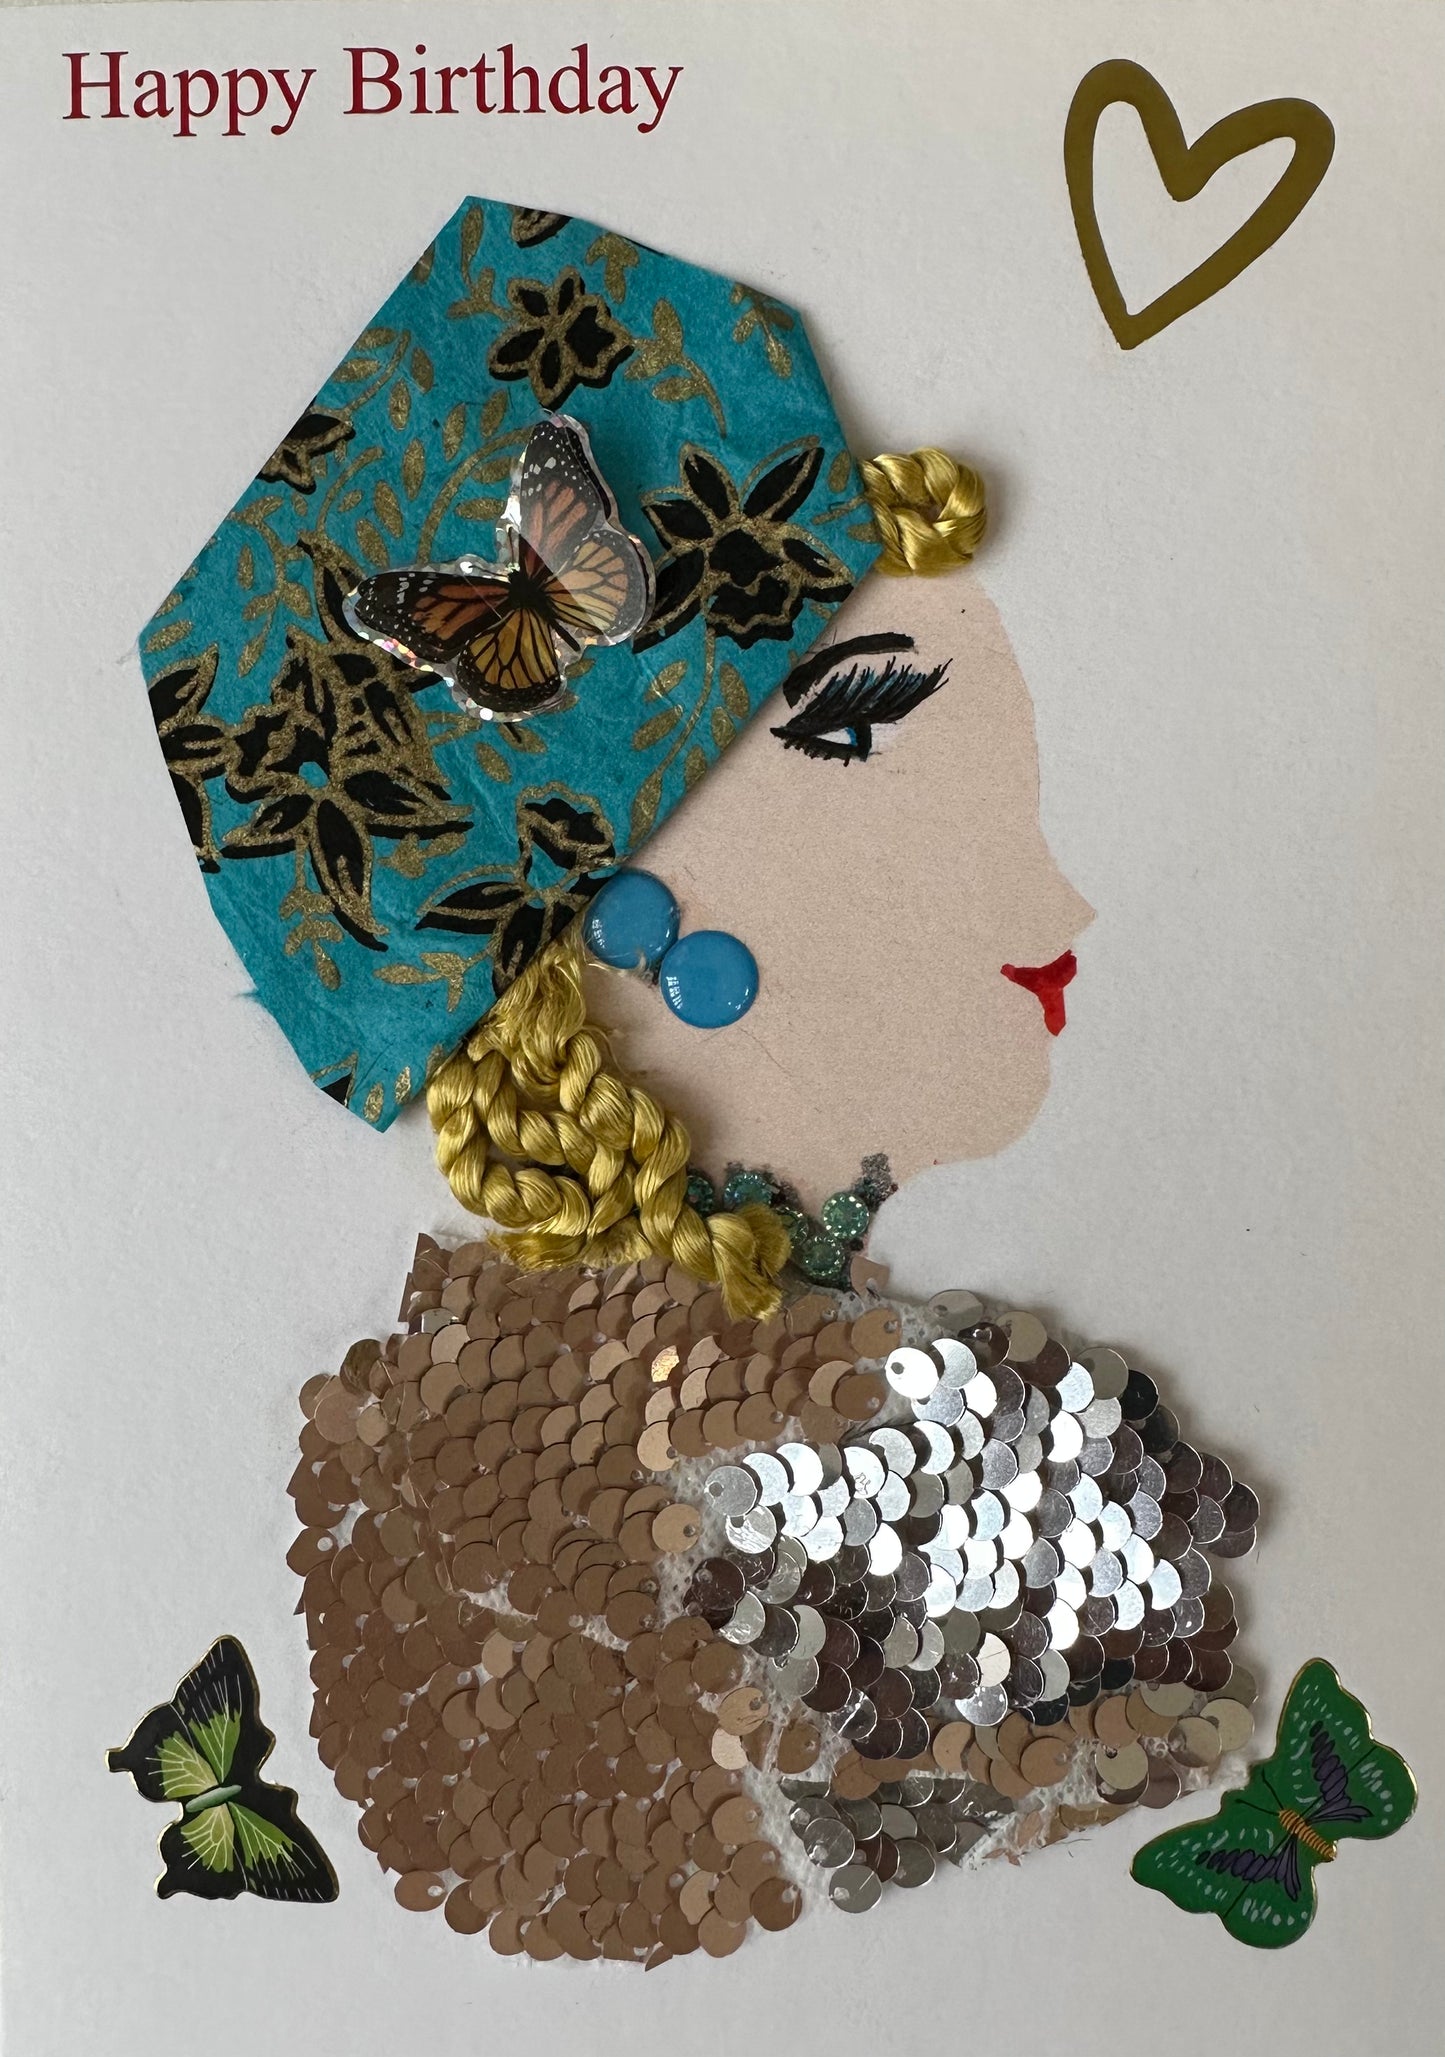 This handmade card is of a woman in a bronze coloured sequin top. Her blonde hair is covered by a teal coloured cloth with black and gold flowers. There is a heart in the upper right corner as well as "Happy Birthday" and butterflies.